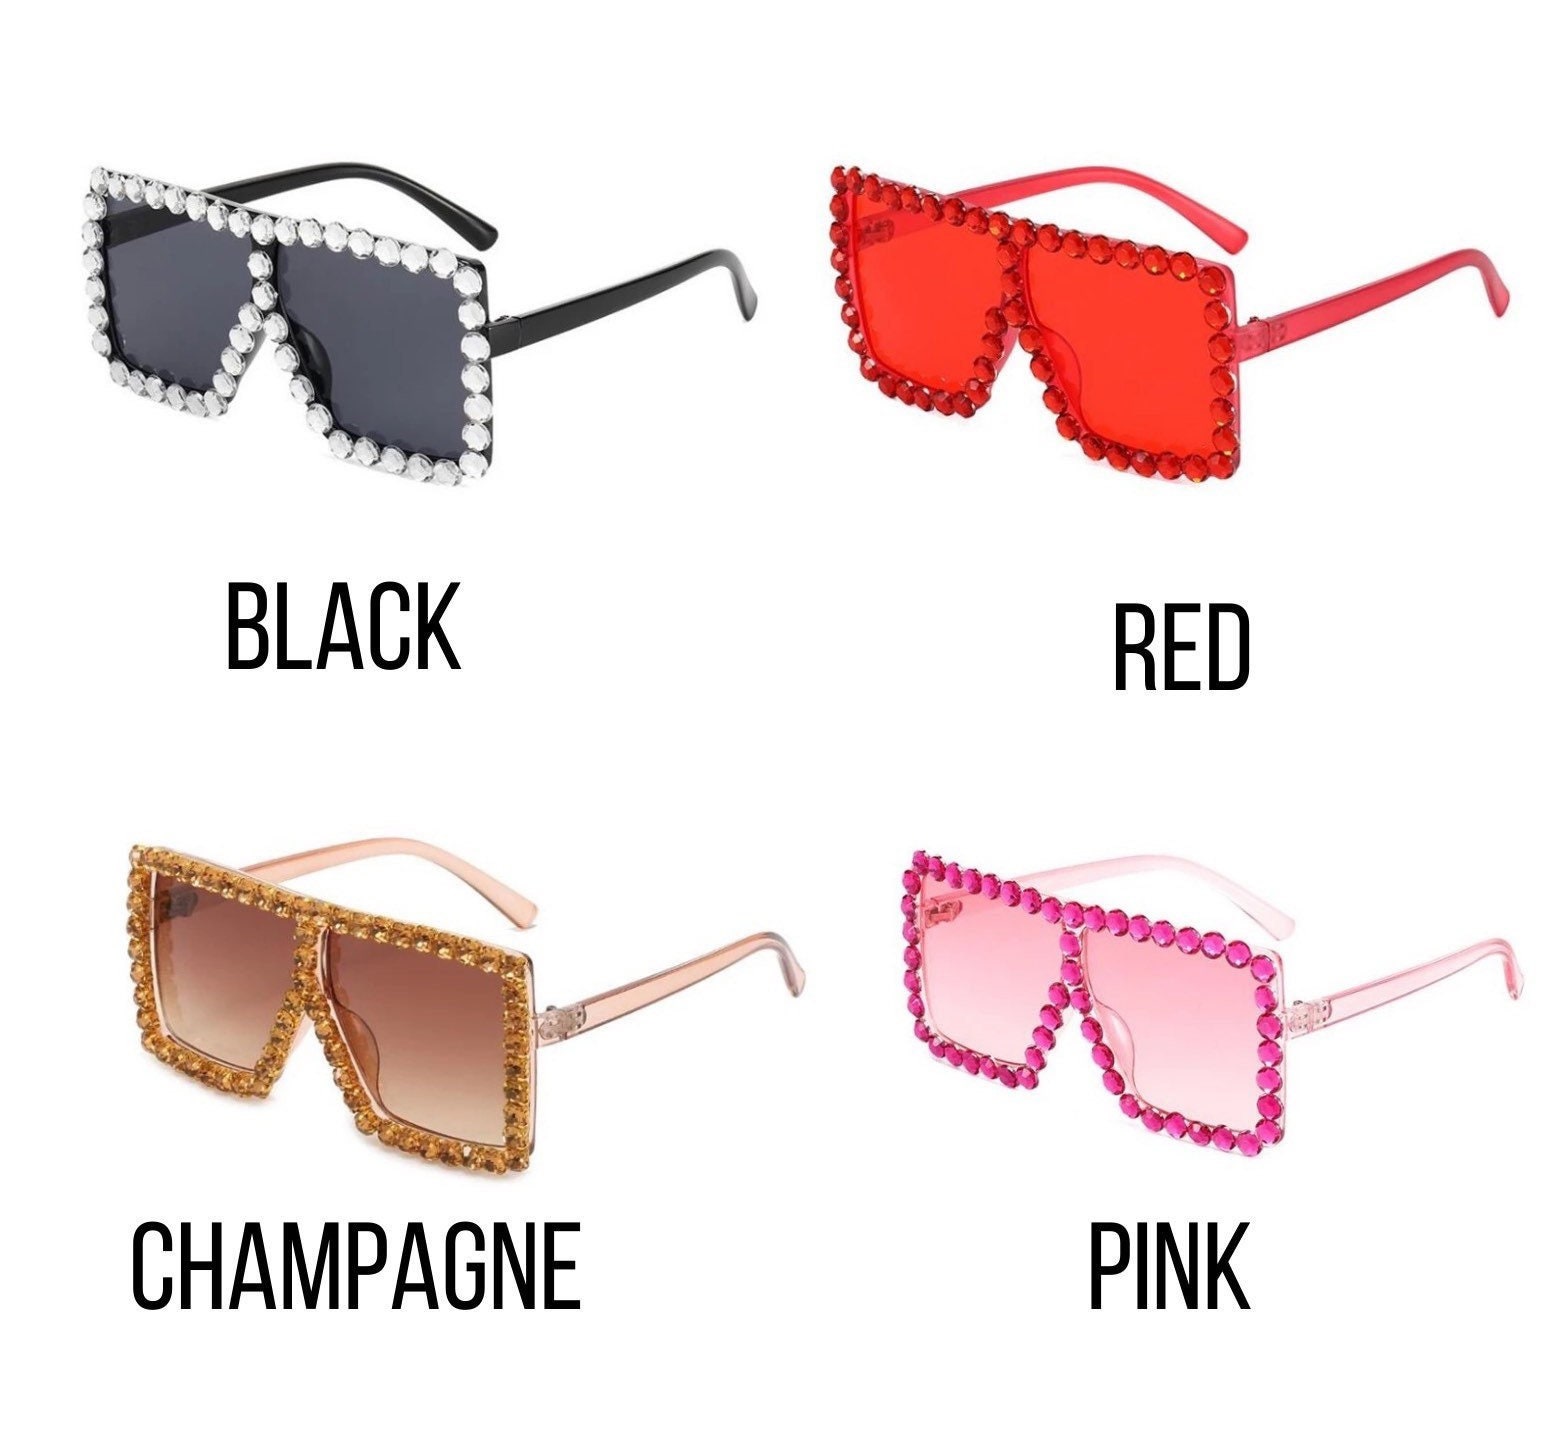 Rhinestone Square Vintage Sunglasses for Kids | Diamond Sunglasses for Girls | Large Face Sunglasses for Toddlers| Miami Frames